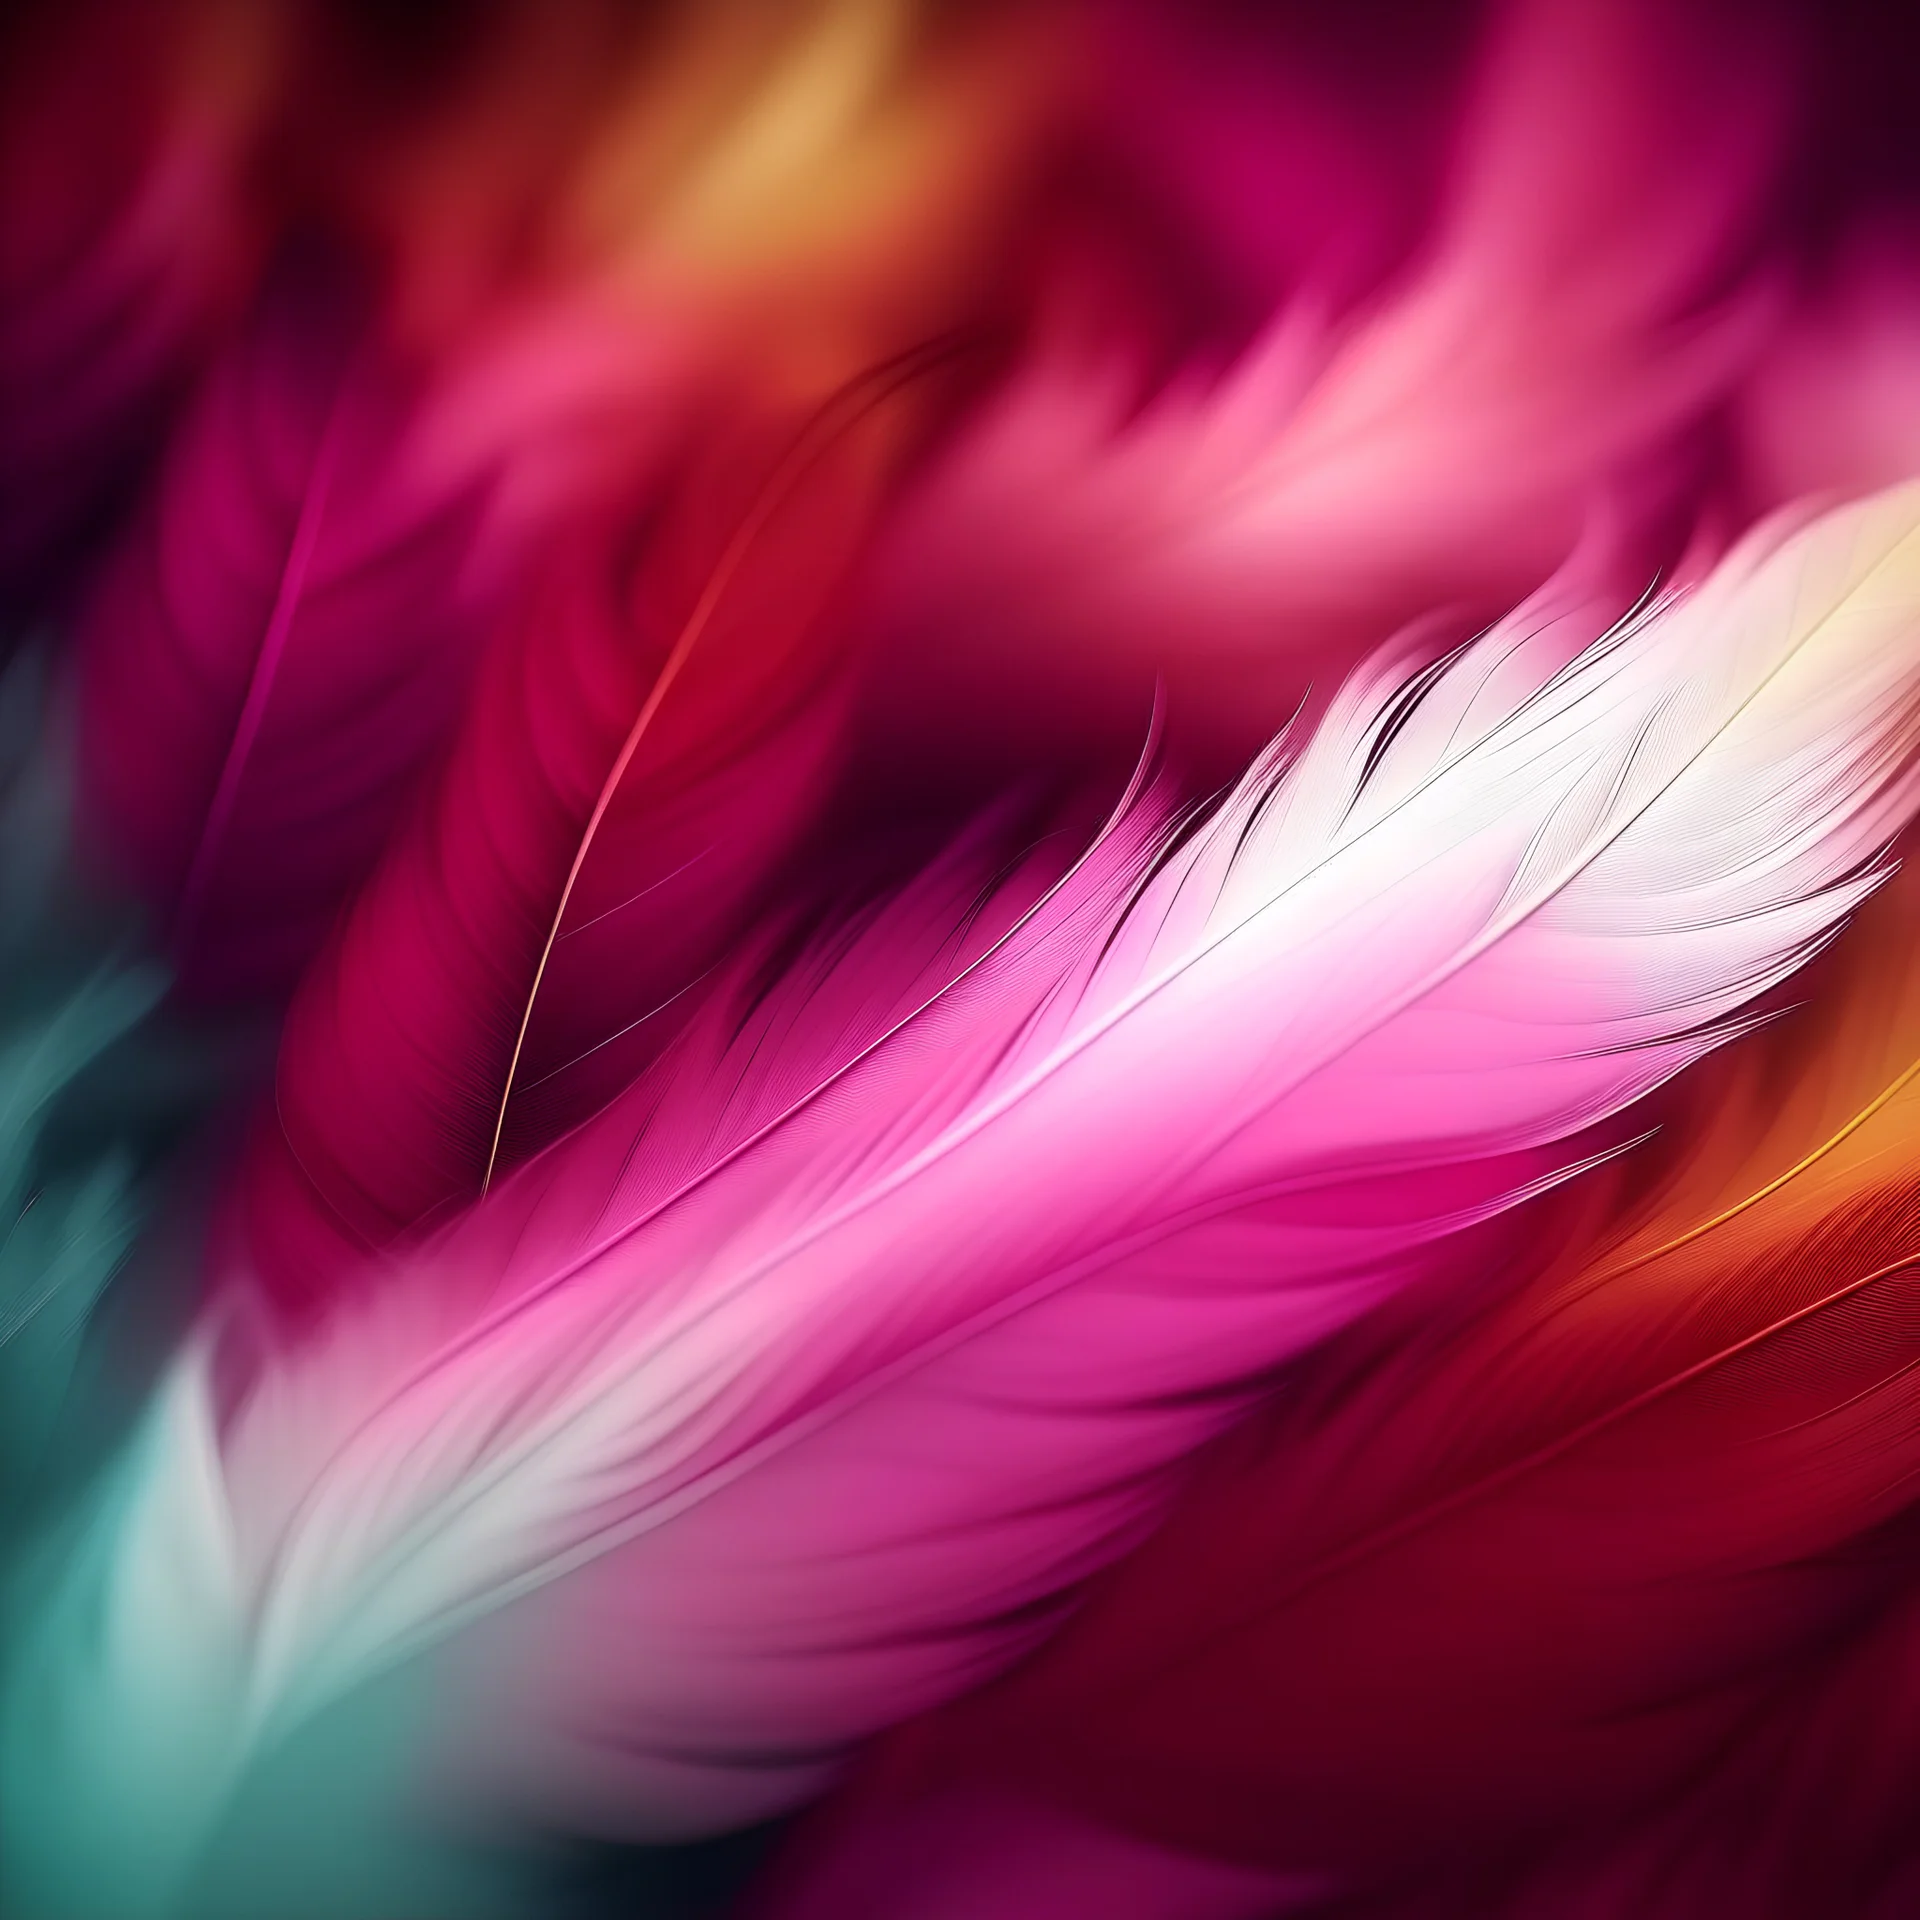 Beautiful maroon patternsAbstract feather rainbow patchwork background. Closeup image of white fluffy feather under colorful pastel neon foggy mist. Fashion Color Trends Spring Summer soft focus.